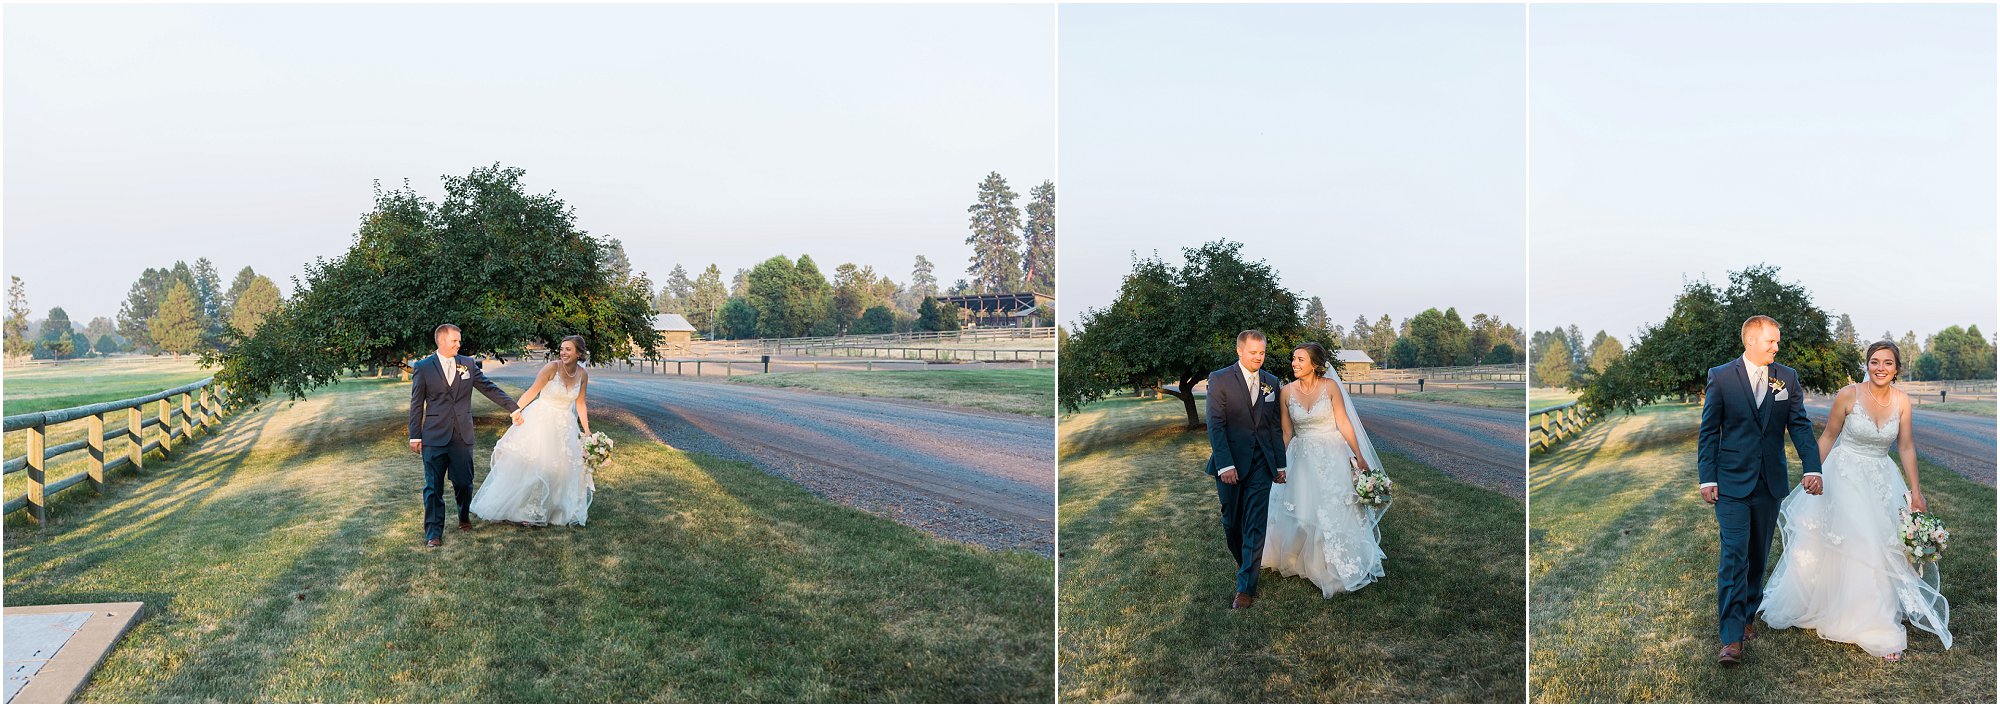 The wedding couple candidly walks towards the camera during their couple's portrait session at Rock Springs Ranch in Tumalo, OR. | Erica Swantek Photography